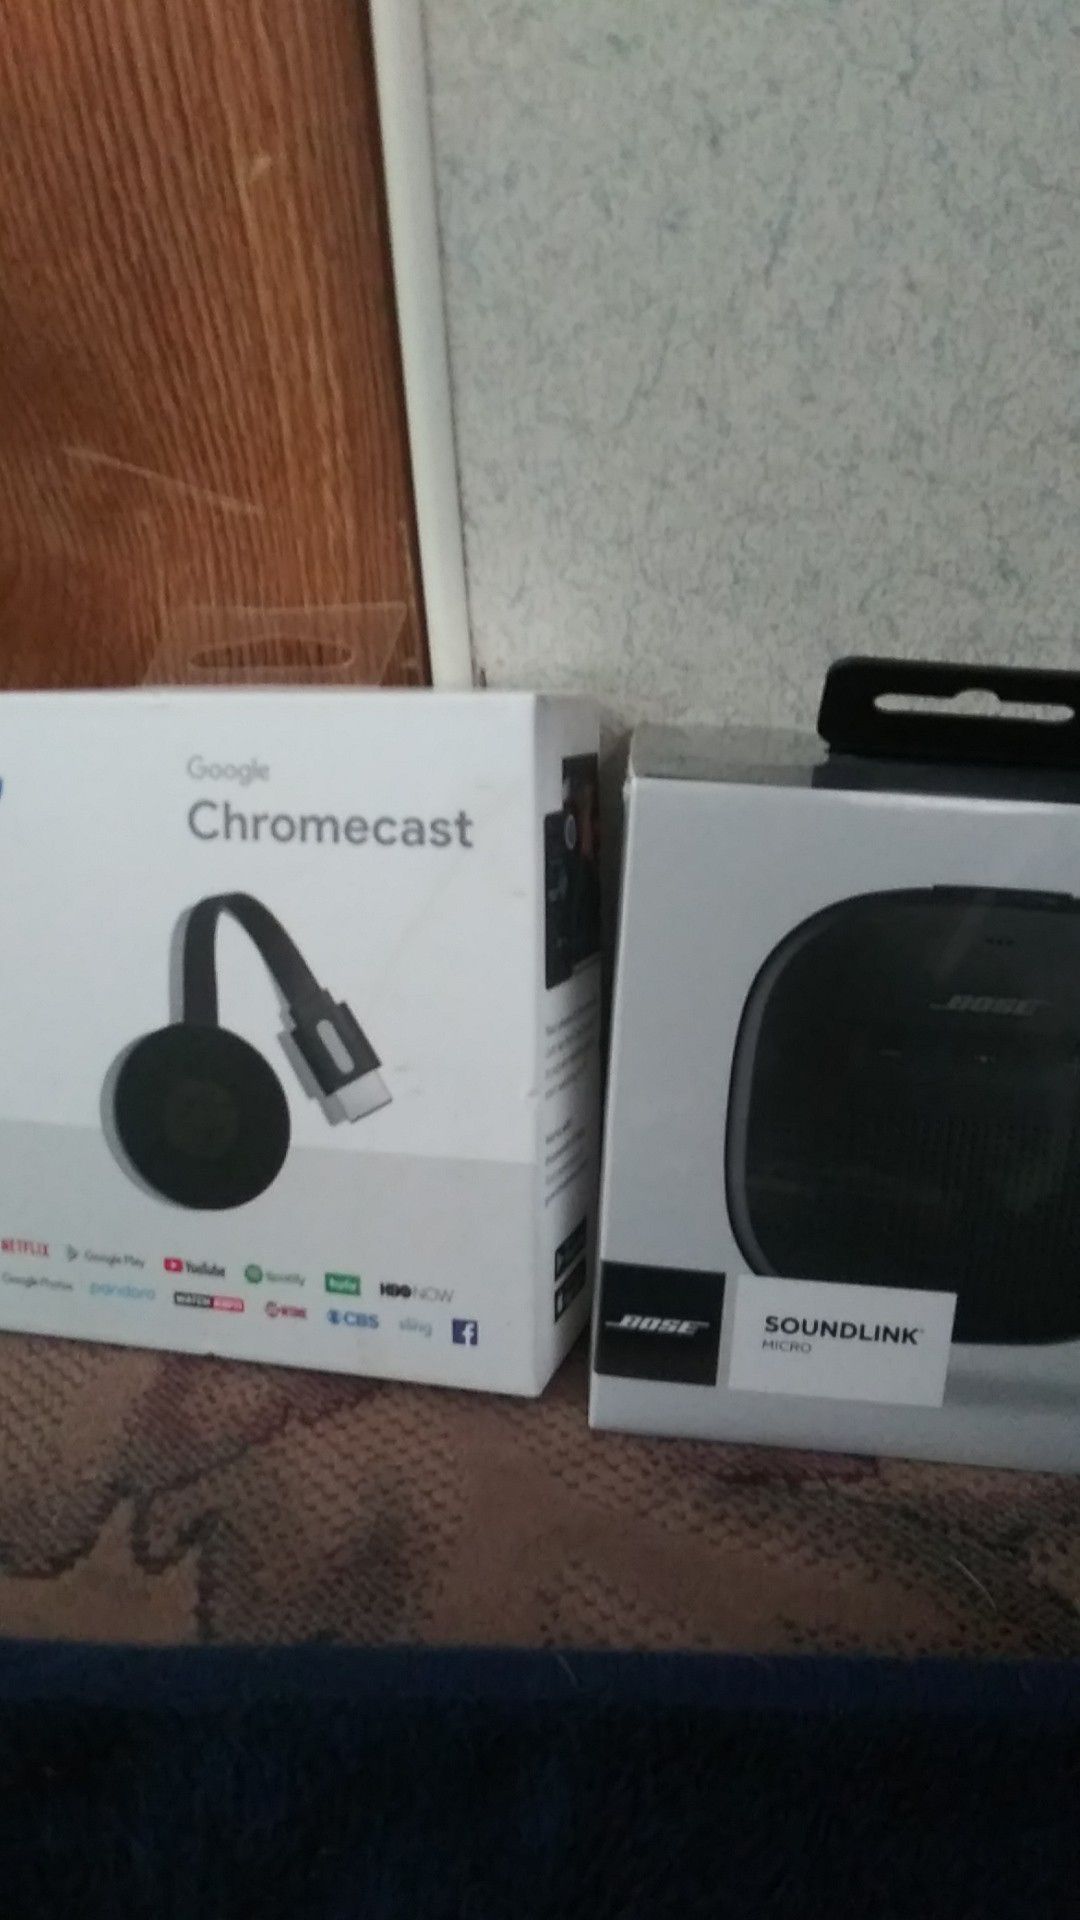 Brand new bose water proof soundlink and chromecast